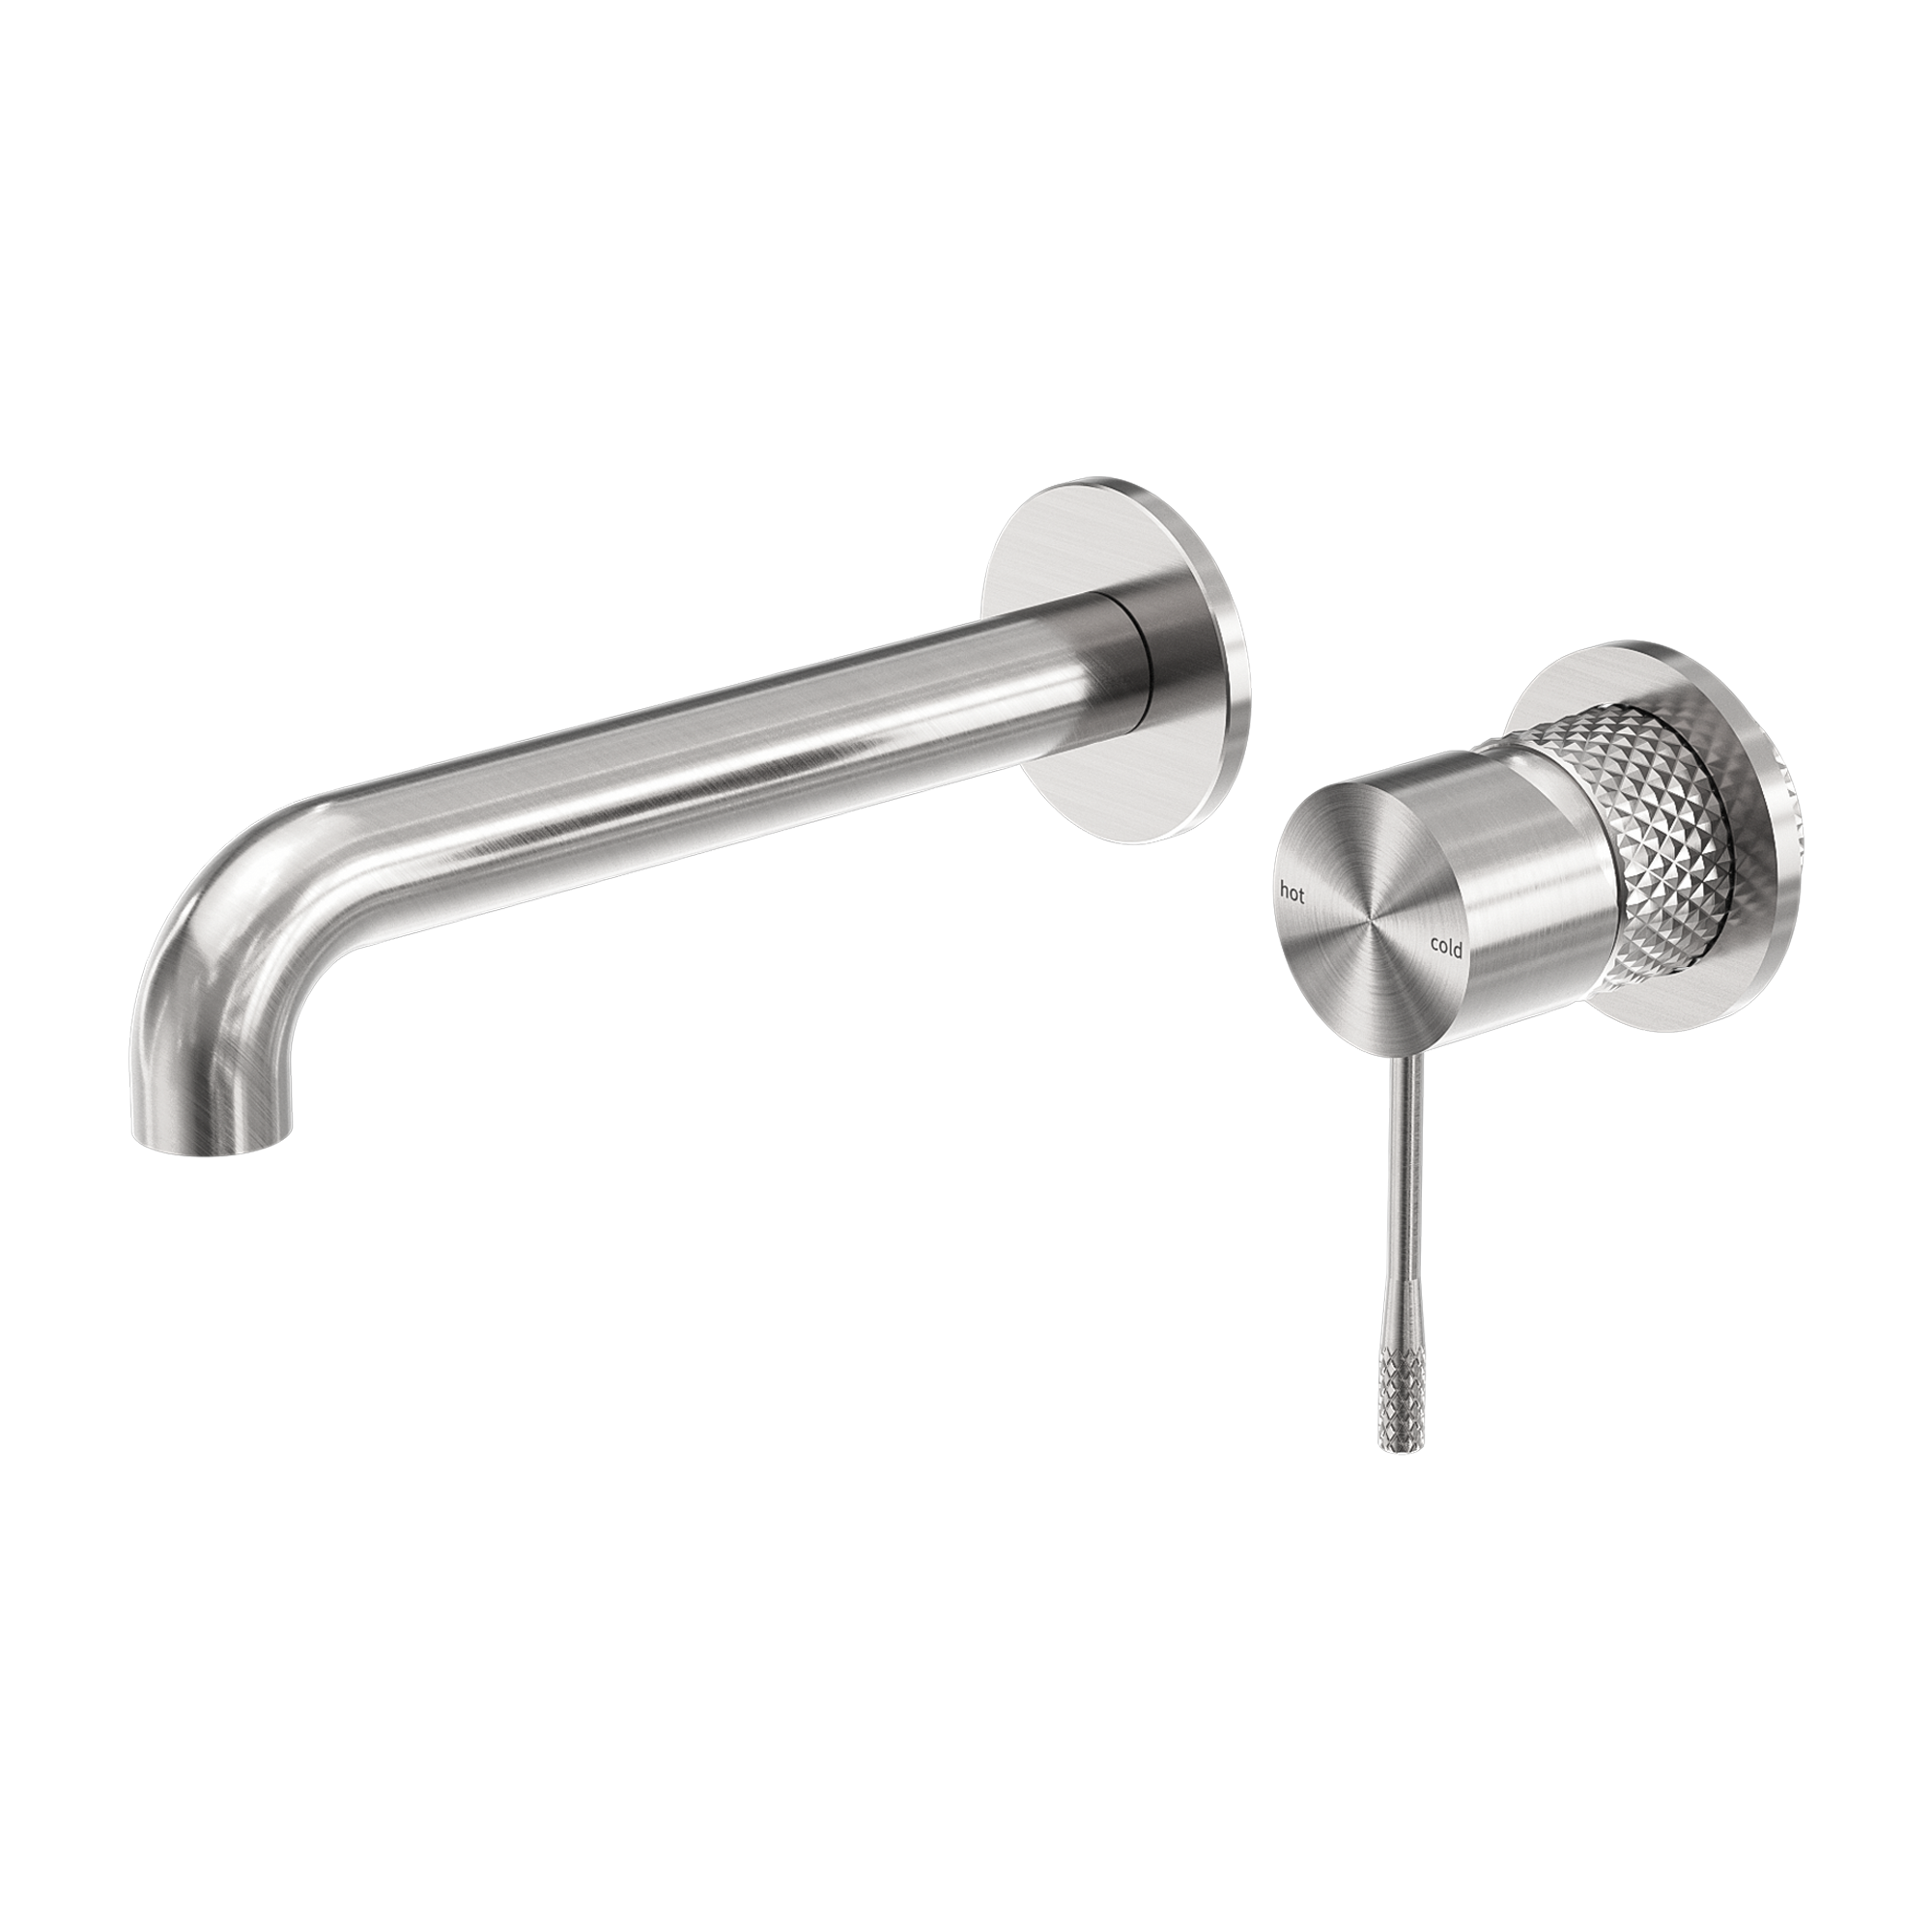 NERO OPAL WALL BASIN/ BATH MIXER SEPARATE BACK PLATE BRUSHED NICKEL (AVAILABLE IN 120MM, 160MM, 185MM, 230MM AND 260MM)